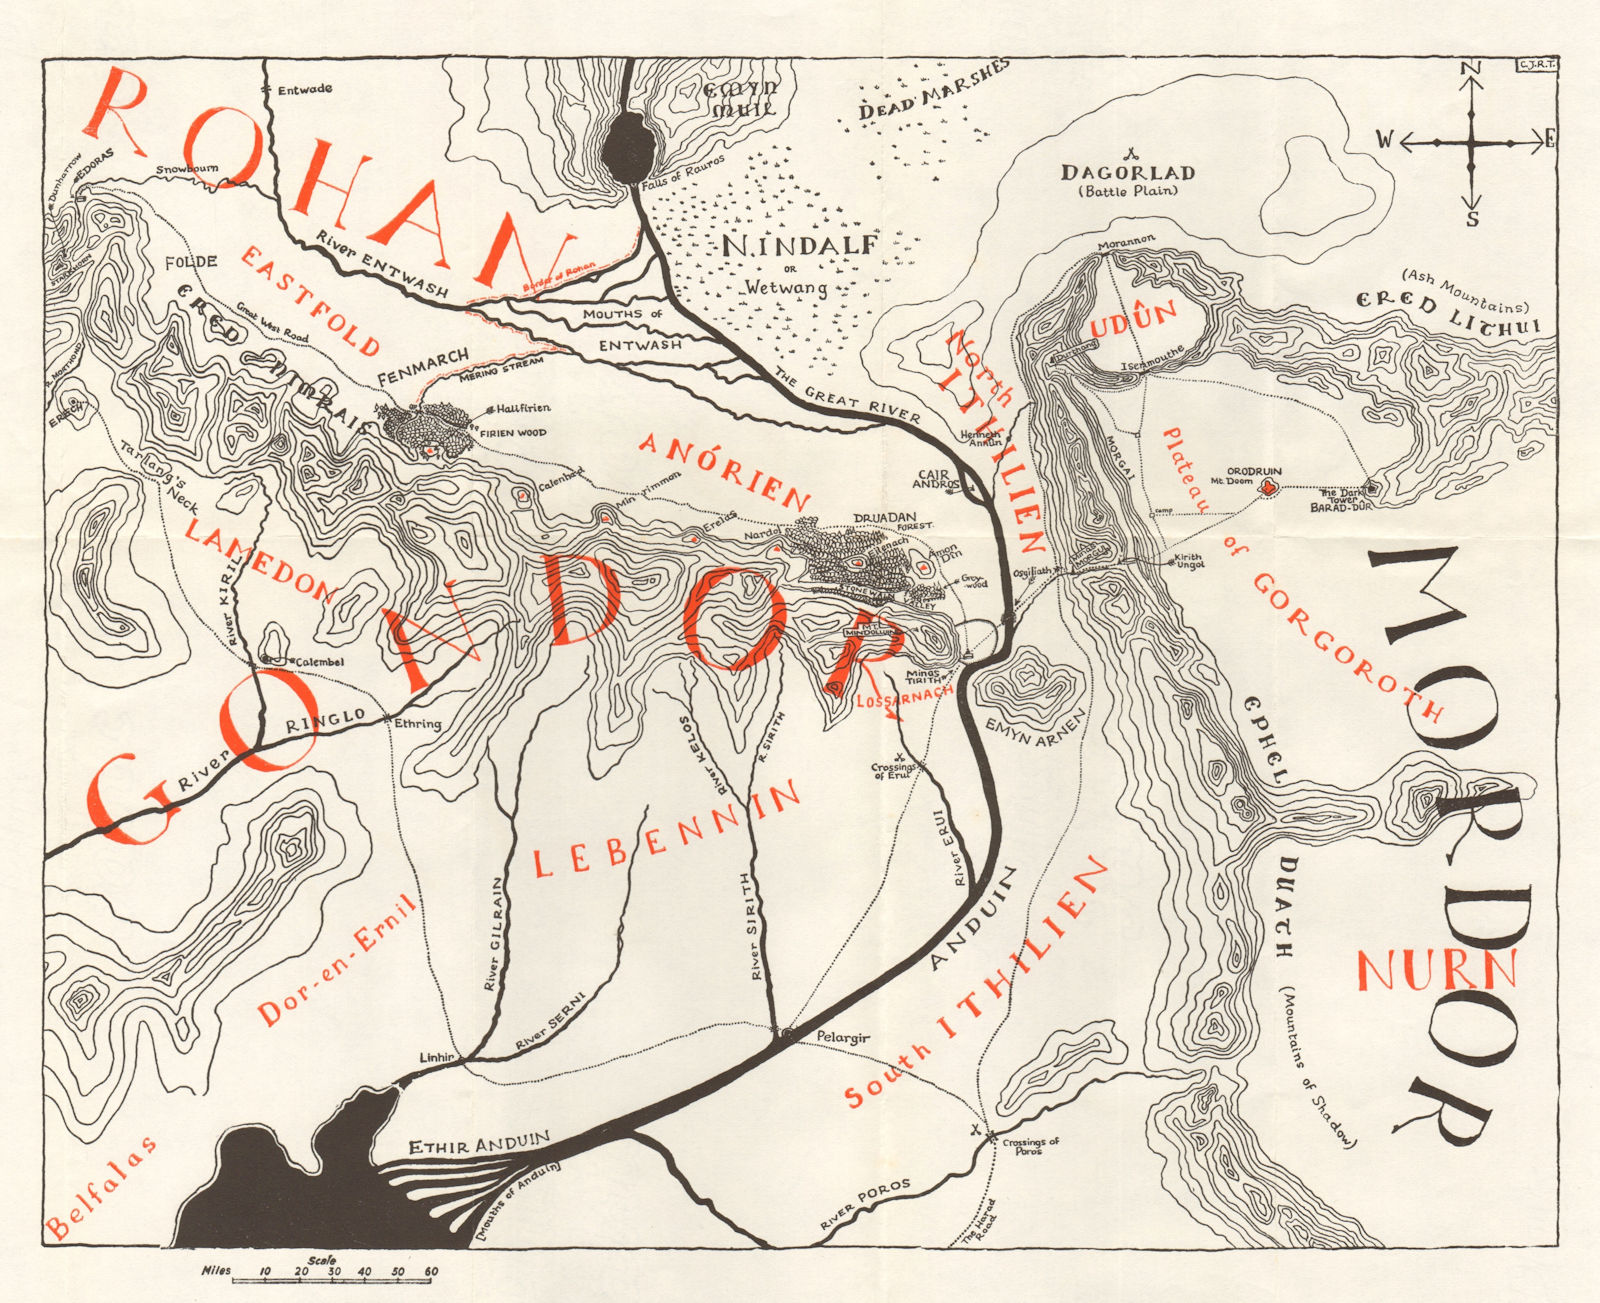 MIDDLE EARTH. Lord of the Rings. Gondor Mordor Rohan Mount Doom TOLKIEN 1966 map